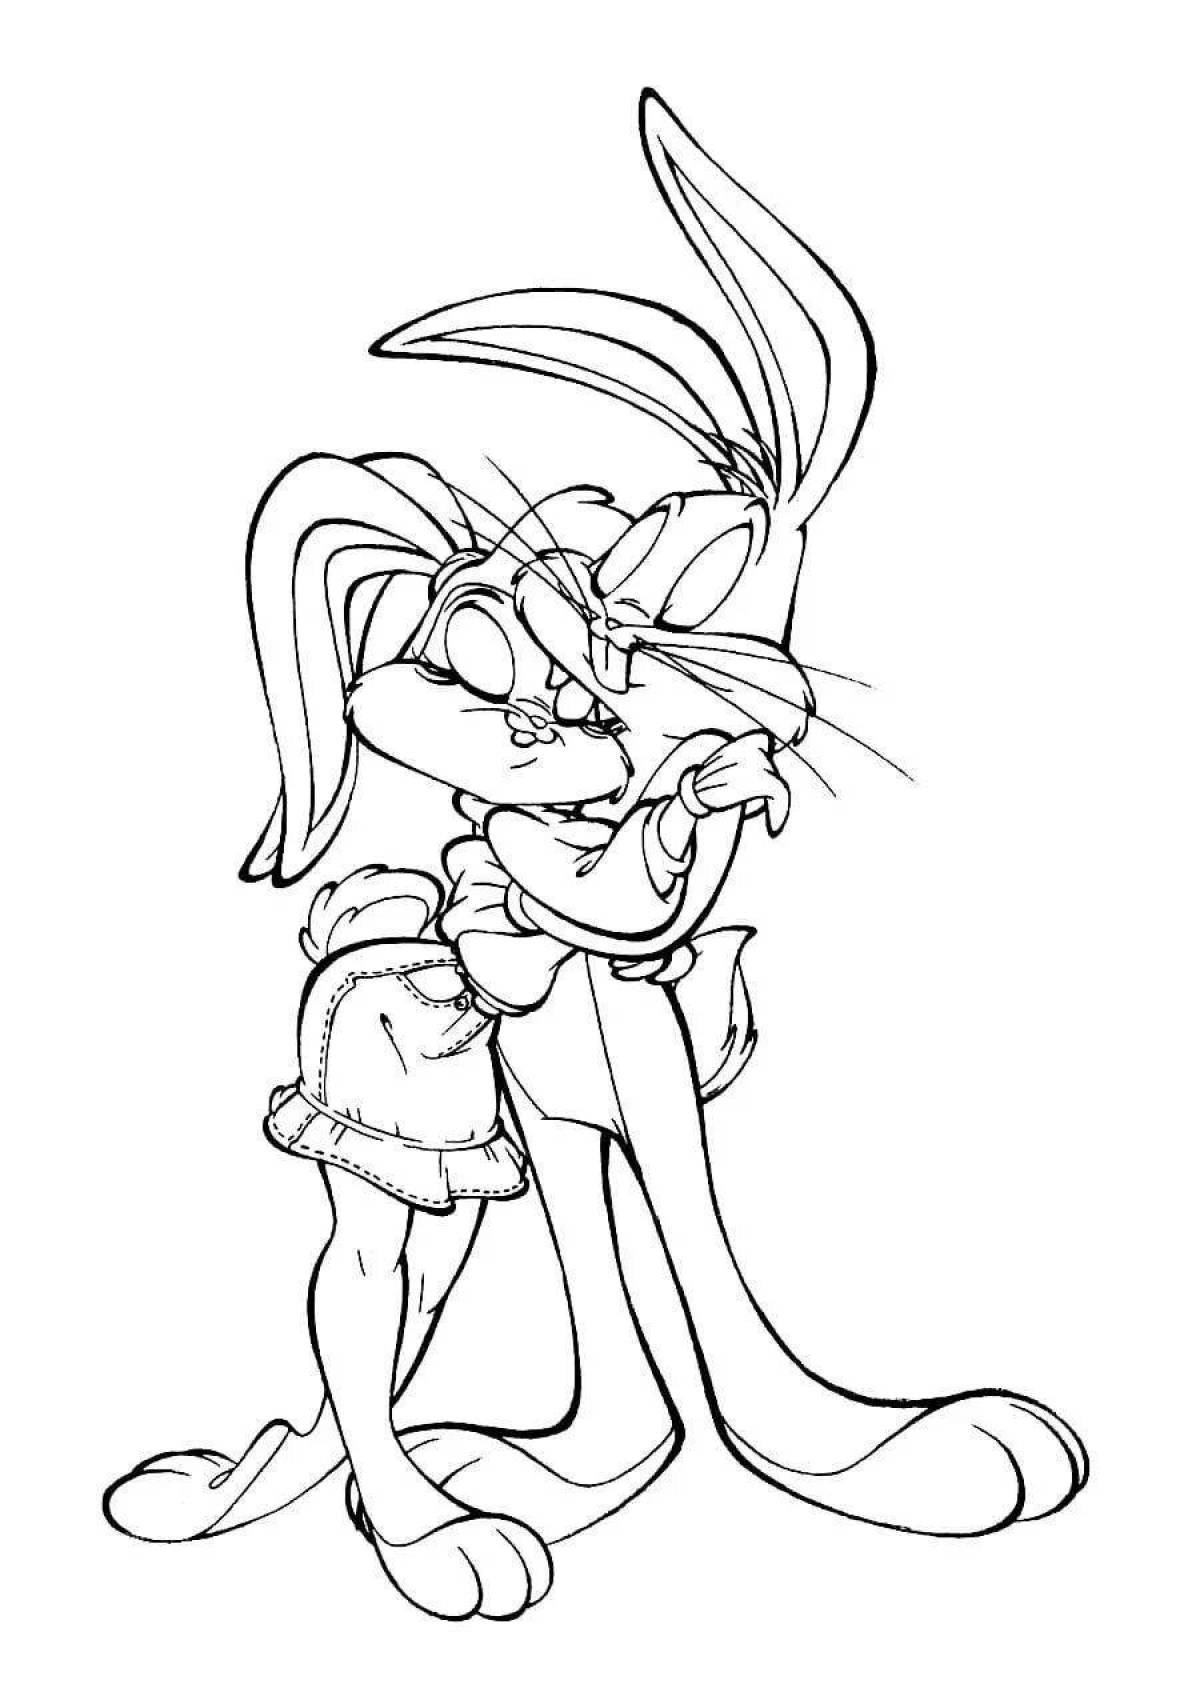 Bunny bugs coloring pages